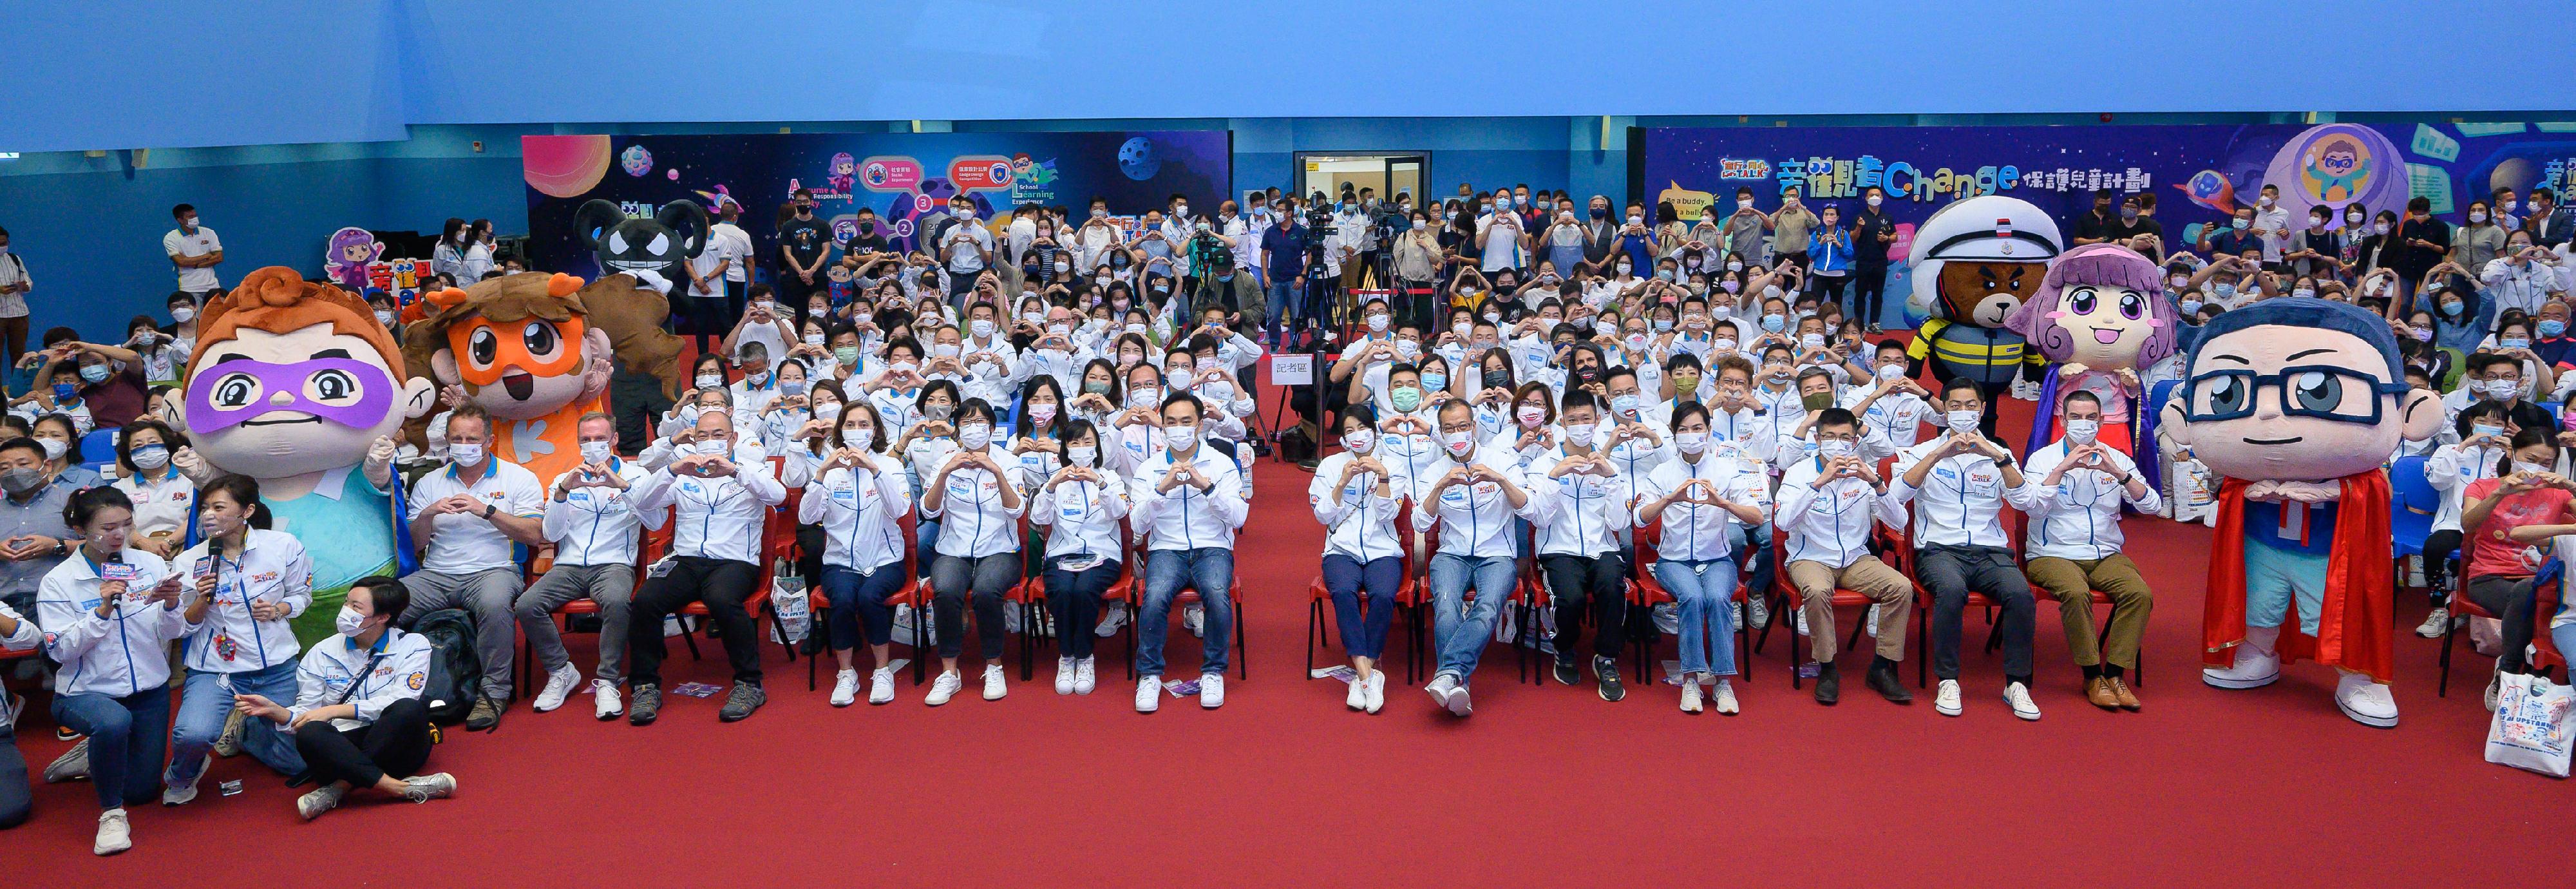 The Hong Kong Police Force (HKPF) held the Closing cum Award Presentation Ceremony for the "Let’s T.A.L.K. – Child Protection Campaign 2022" today (November 20). Picture shows the Deputy Commissioner of Police (Operations), Mr Yuen Yuk-kin (front row, seventh left); the Director of Social Welfare, Miss Charmaine Lee (front row, sixth left); the Ambassador of the Child Protection Campaign, Ms Guo Jingjing (front row, seventh right); the representative of the Hong Kong Paralympic Committee, Mr So Wa-wai (front row, fifth right); the Director of Crime and Security of the HKPF, Mr Yip Wan-lung (front row, sixth right); the Assistant Commissioner of Police (Crime), Ms Chung Wing-man (front row, fifth left); and the Chief Superintendent of Crime Wing Support Group of the HKPF, Ms Yu Hoi-kwan (front row, fourth right); and the Senior Police Clinical Psychologist, Ms Mak Wing-fun (front row, fourth left), taking a group photo with other guests.